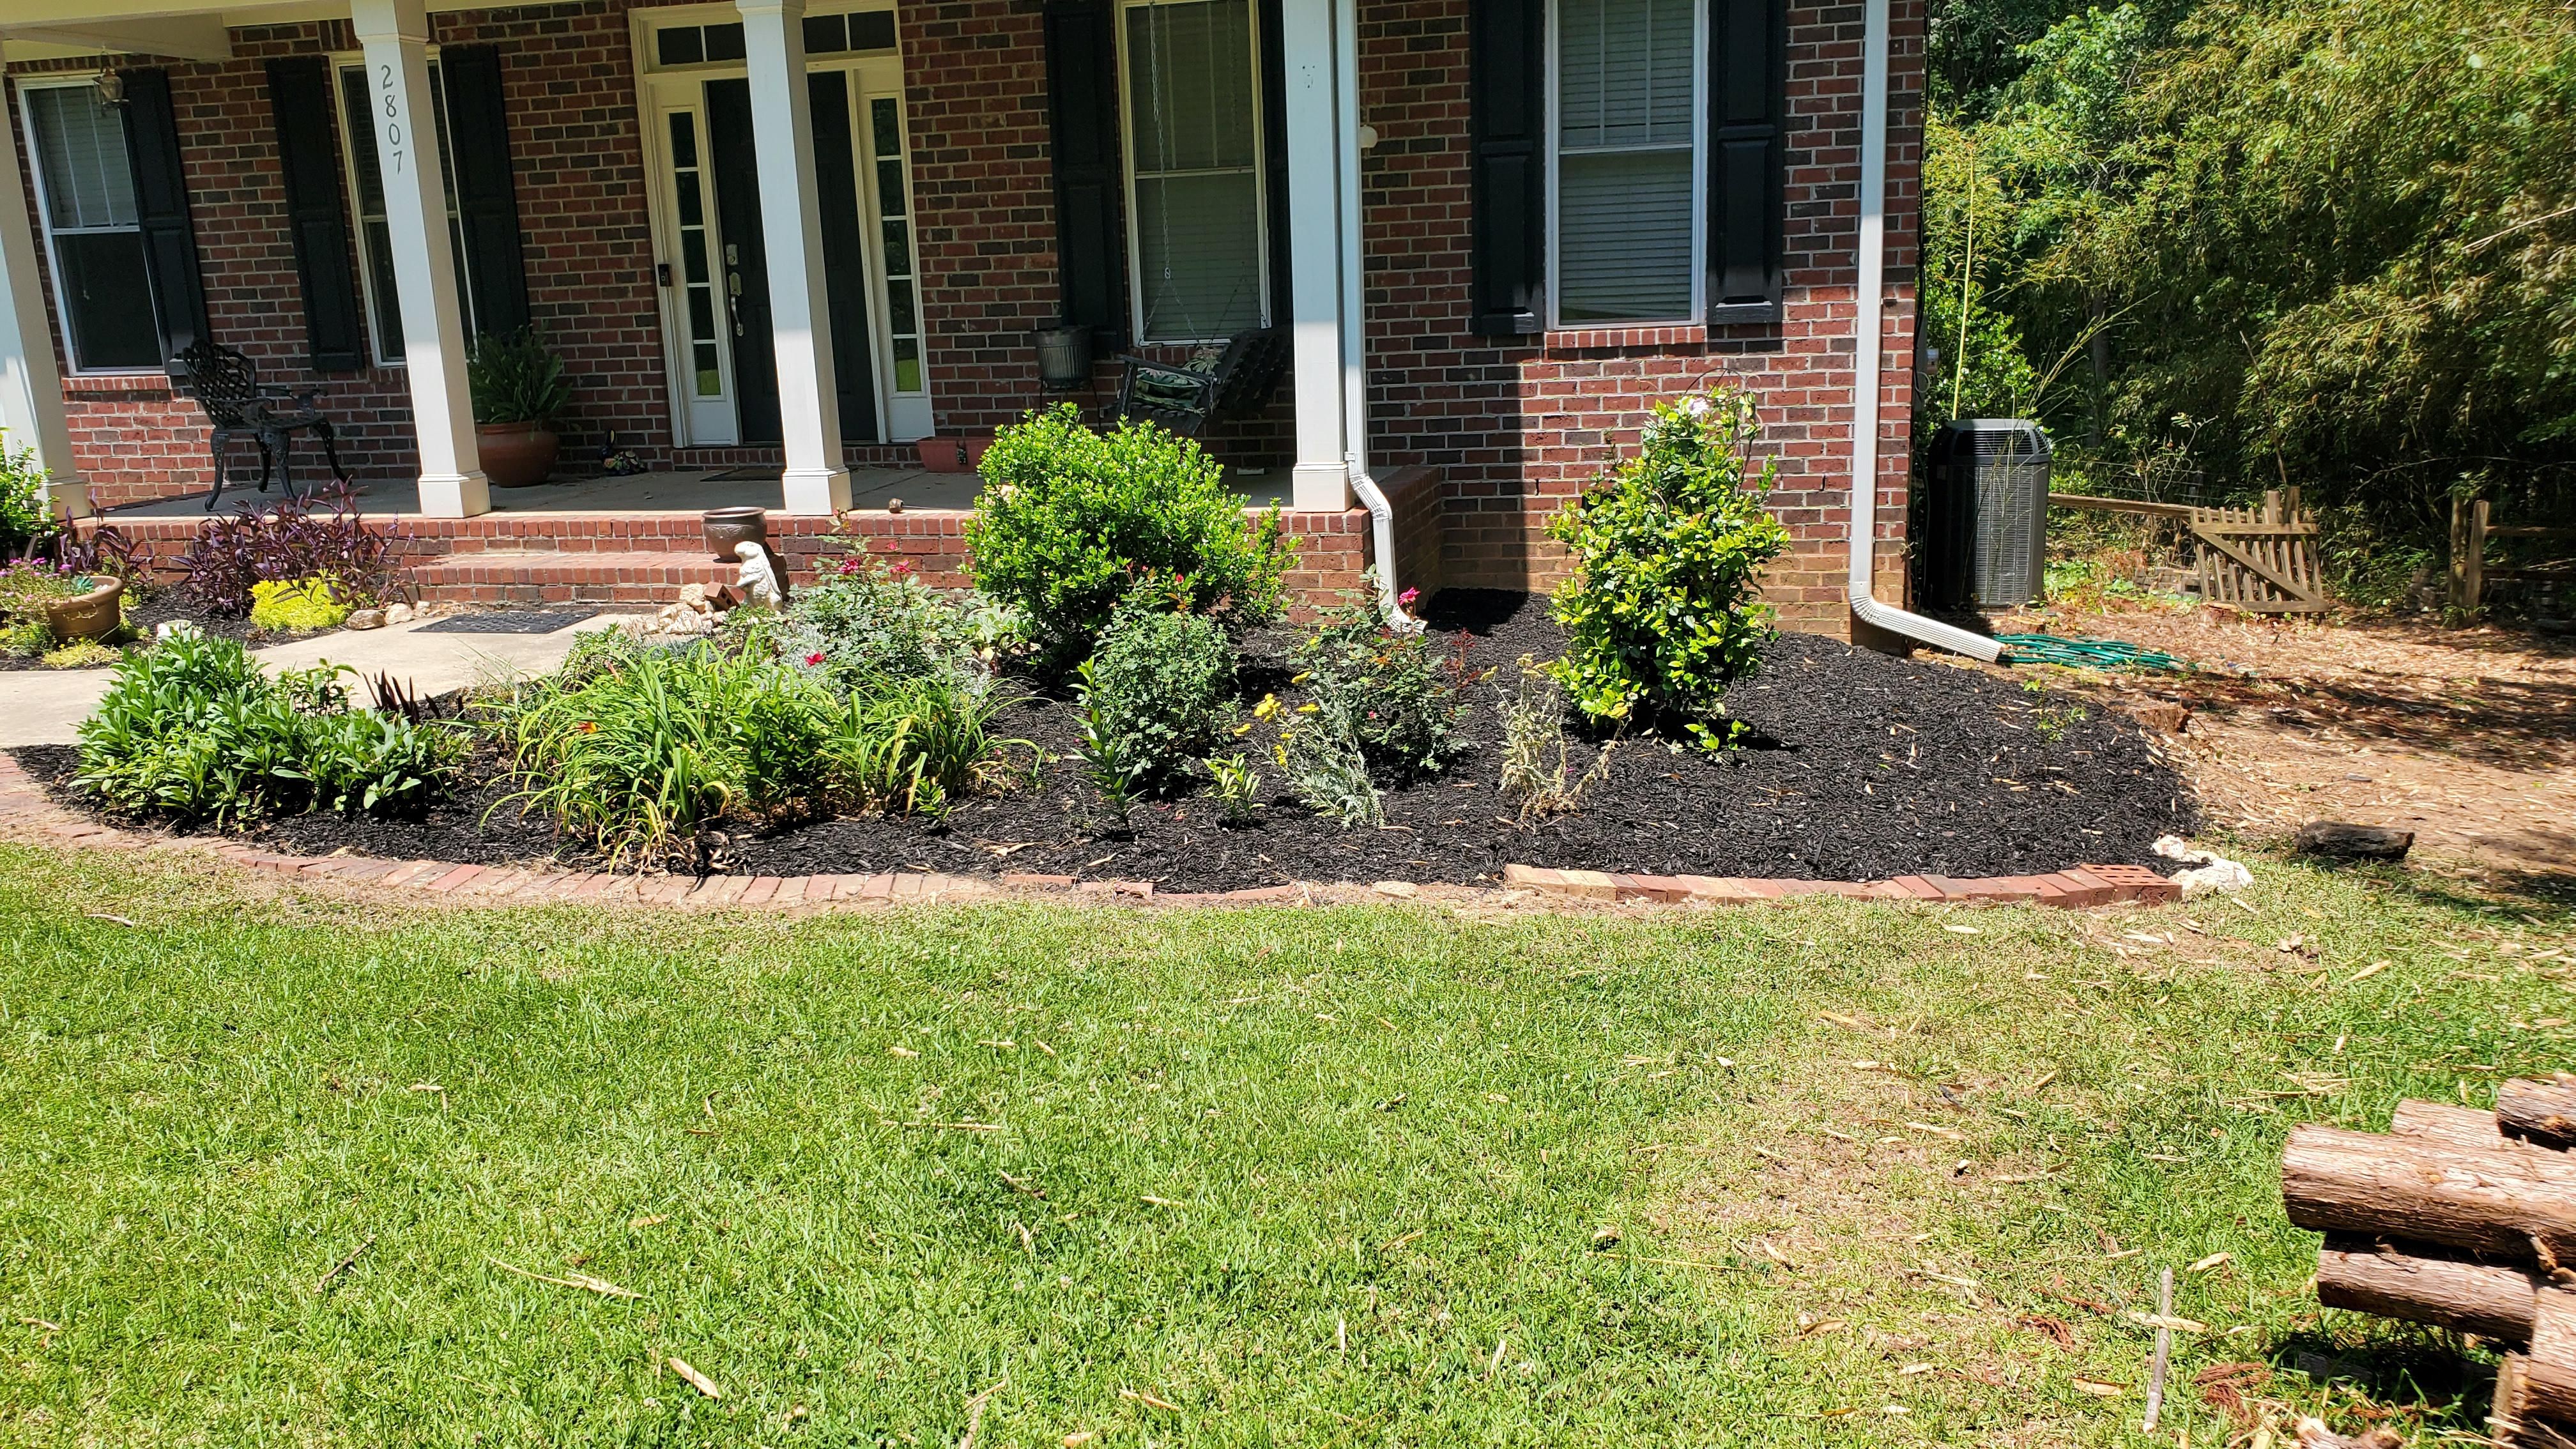 Landscaping for Muddy Paws Landscaping in Lugoff, SC